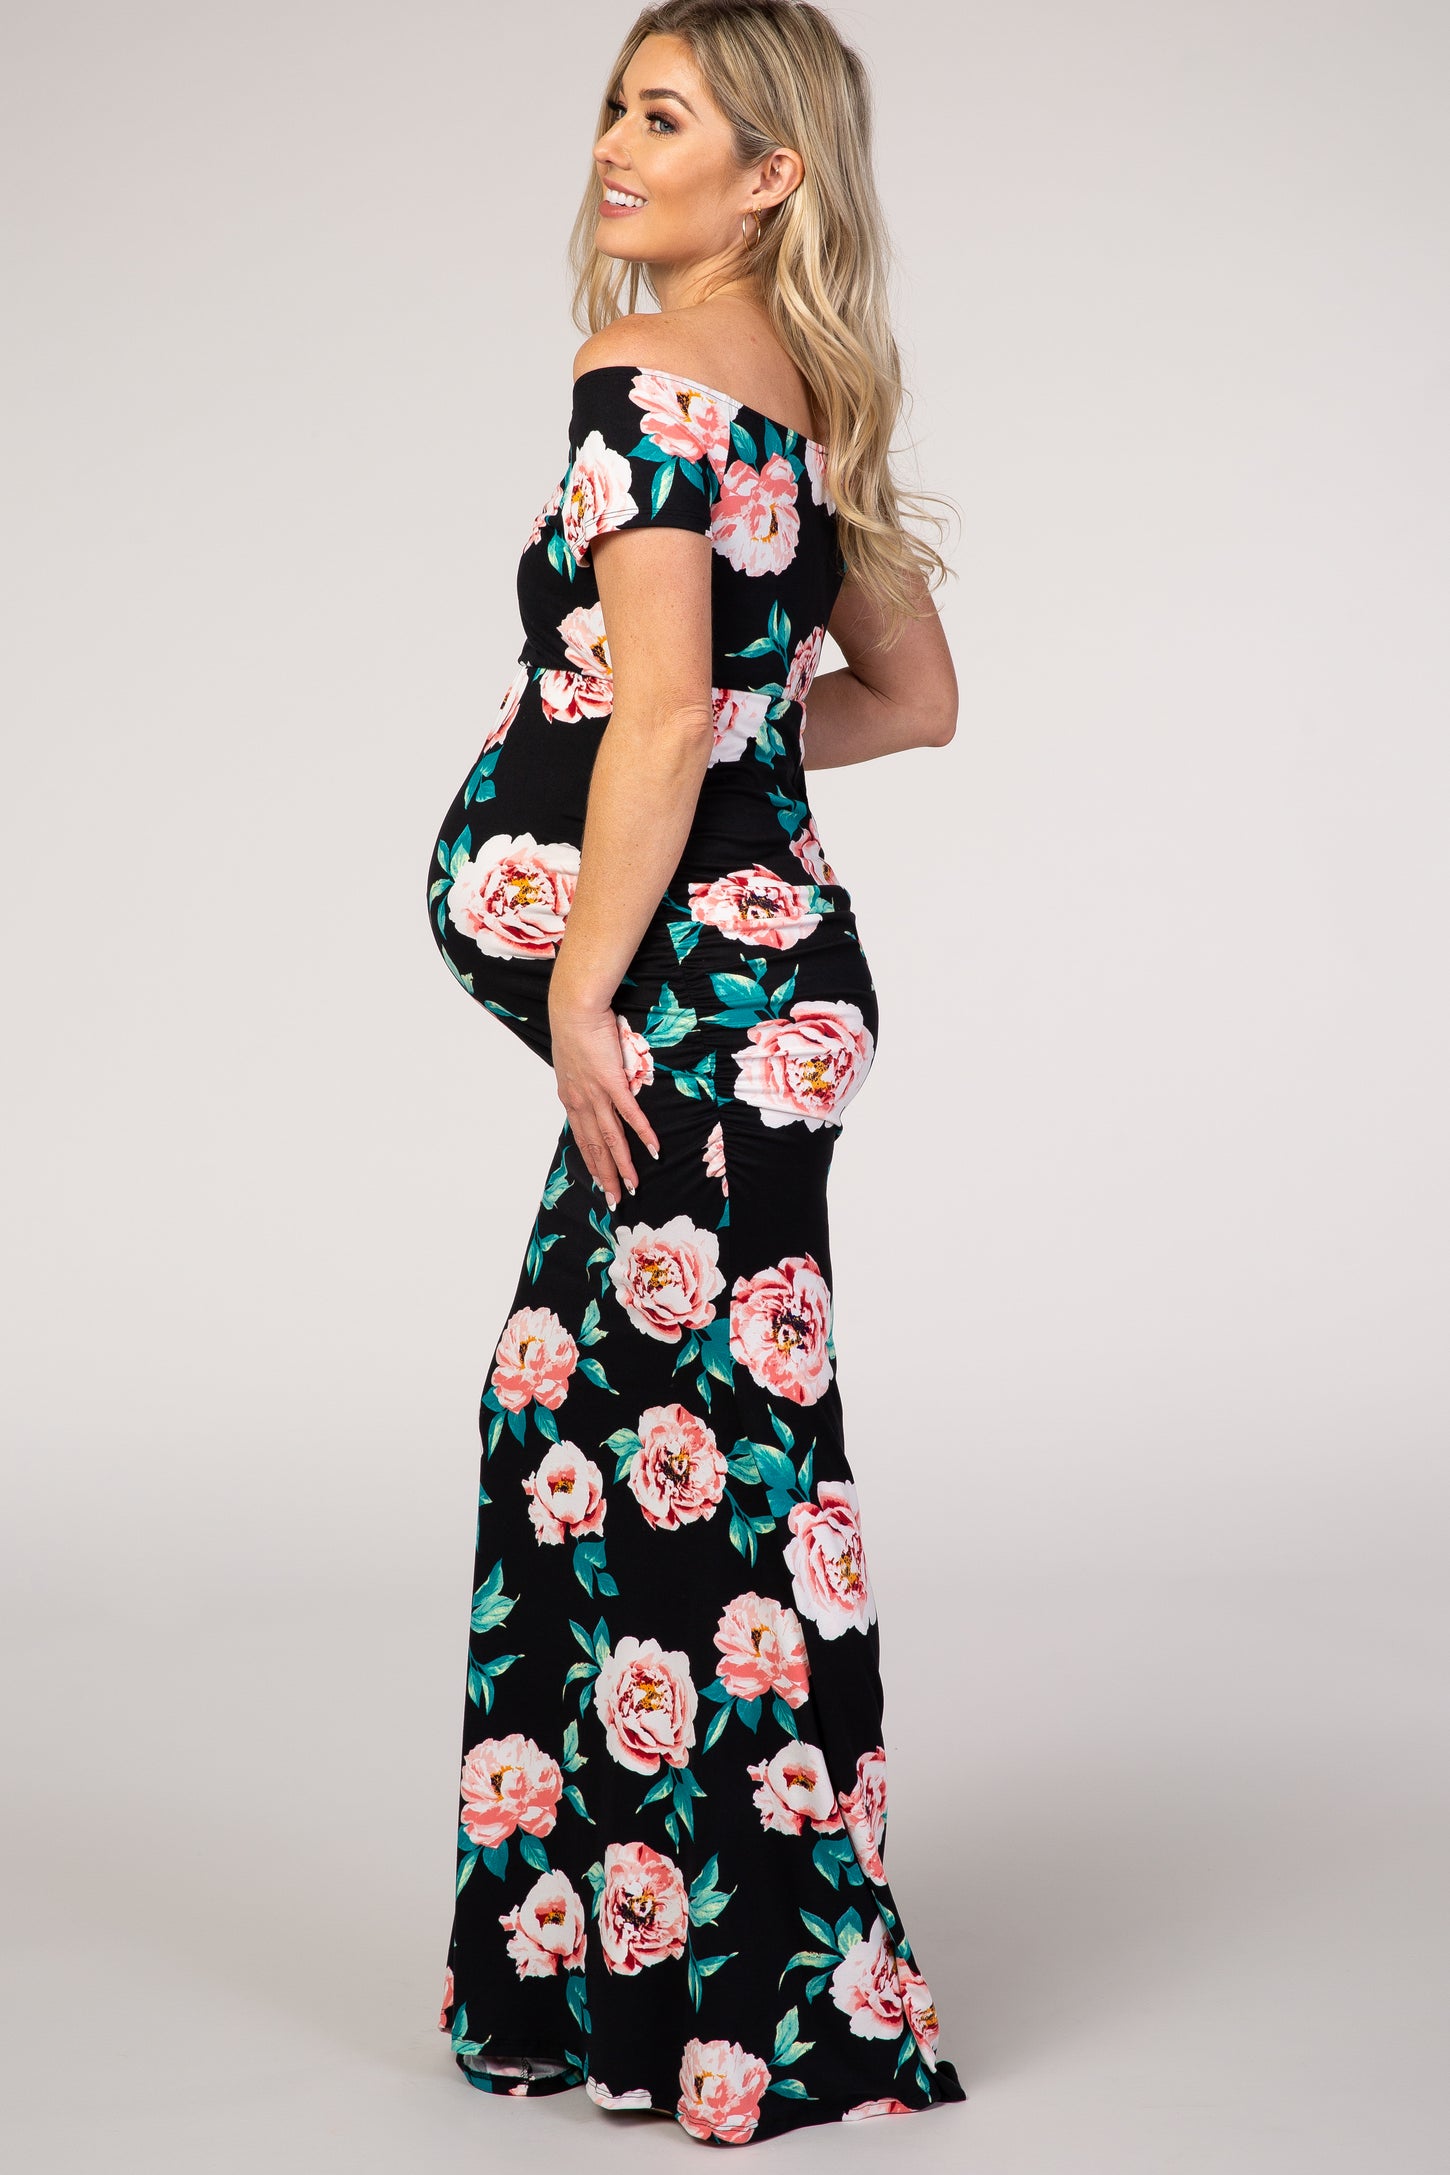 PinkBlush Black Floral Off Shoulder Wrap Maternity Photoshoot Gown/Dress